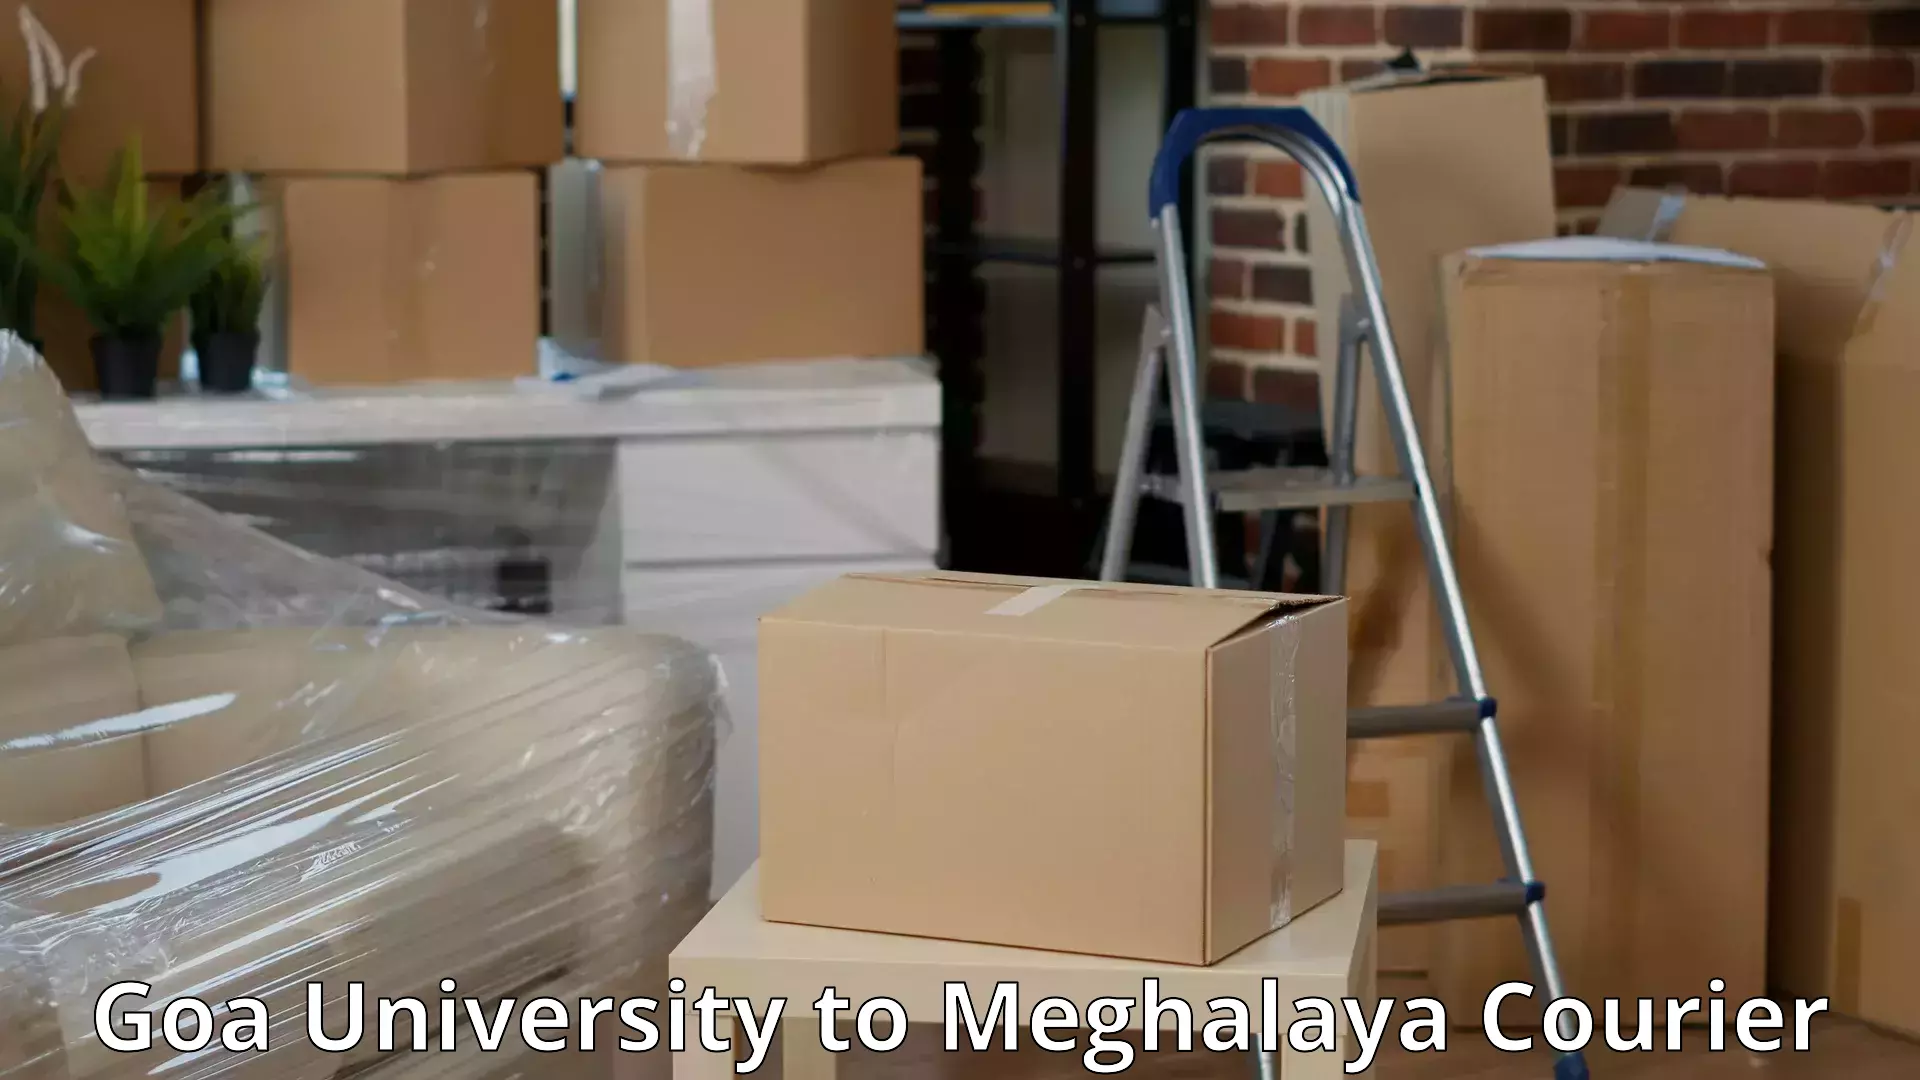 Furniture delivery service Goa University to East Garo Hills